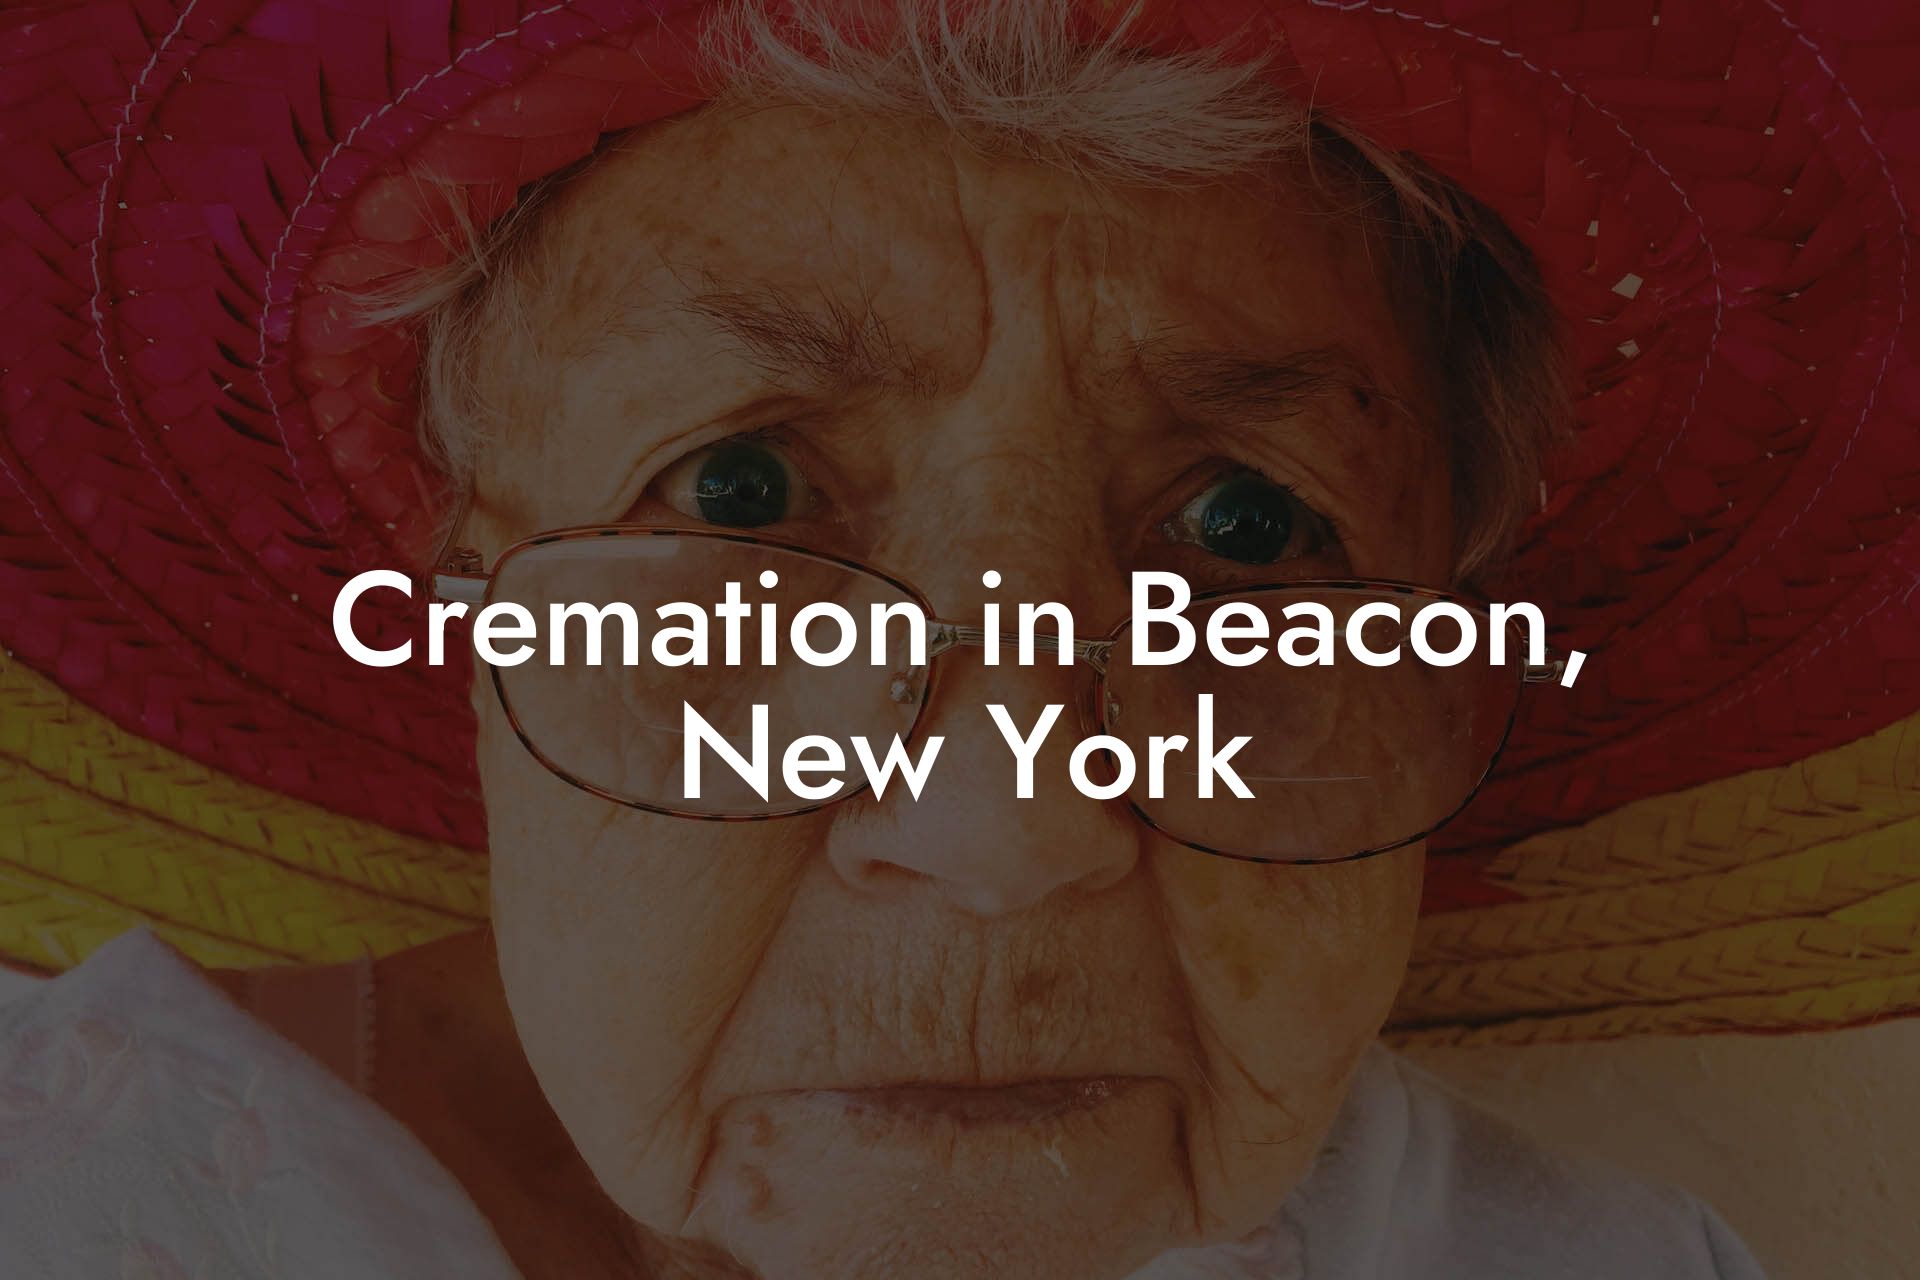 Cremation in Beacon, New York